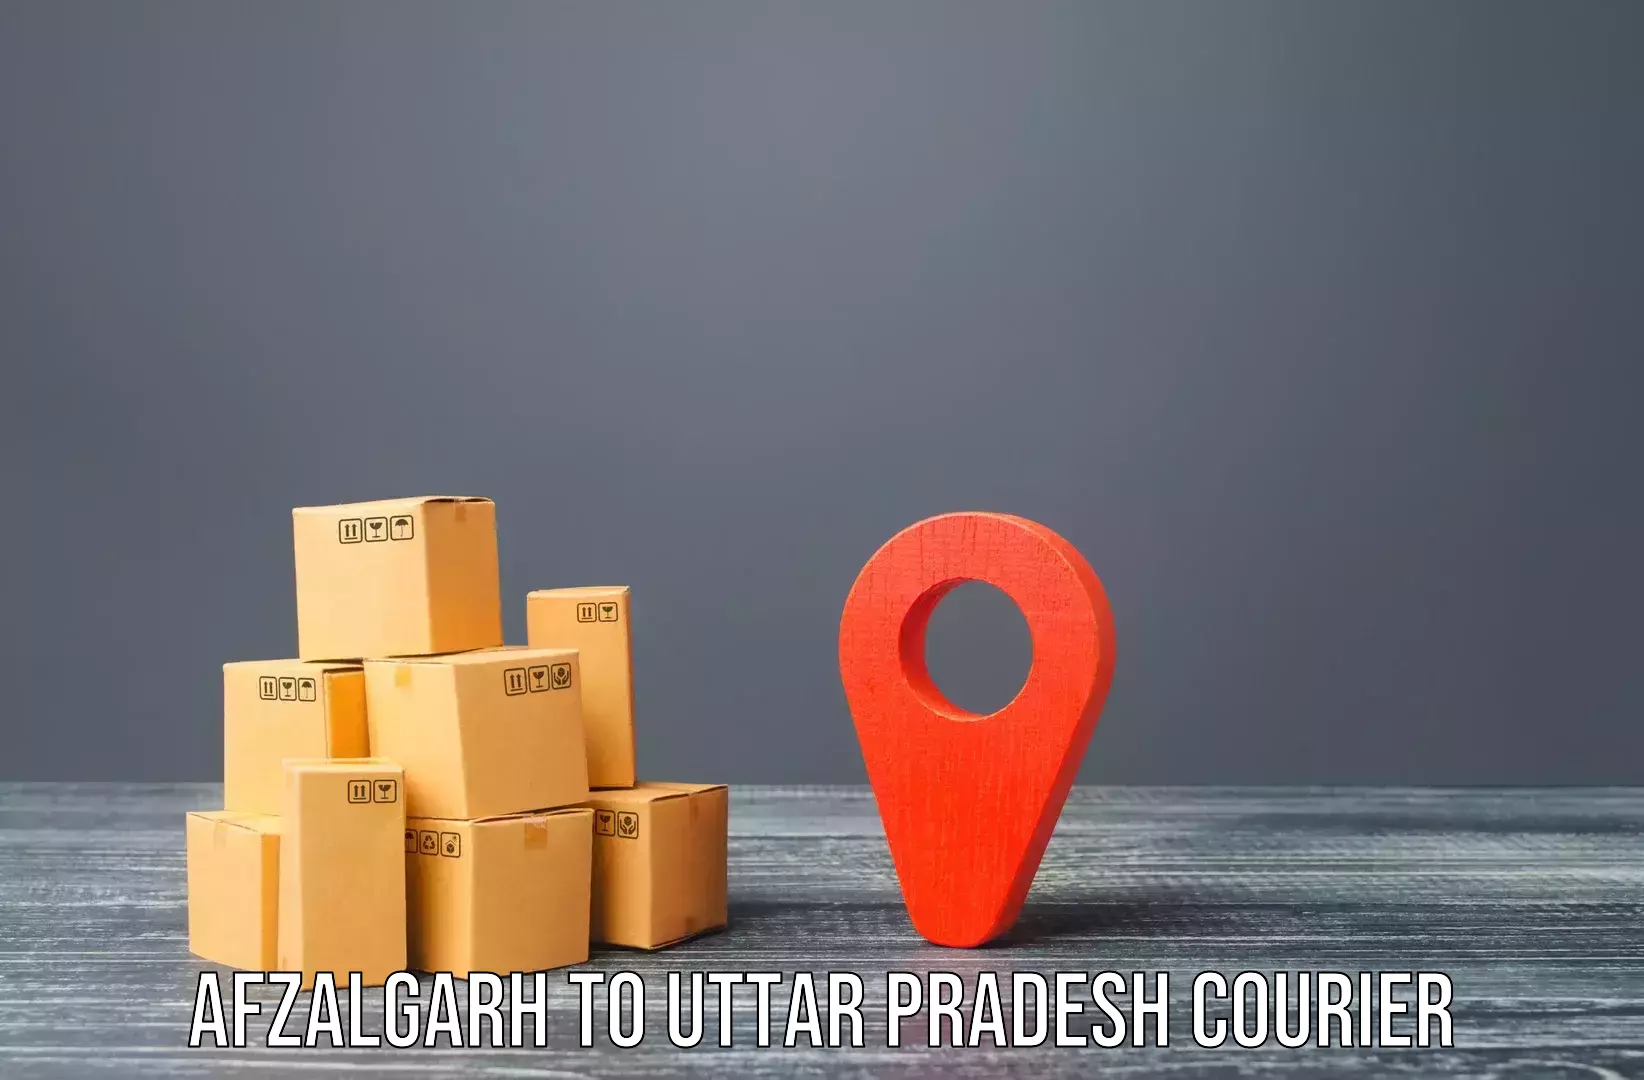 Quality moving services in Afzalgarh to Noida